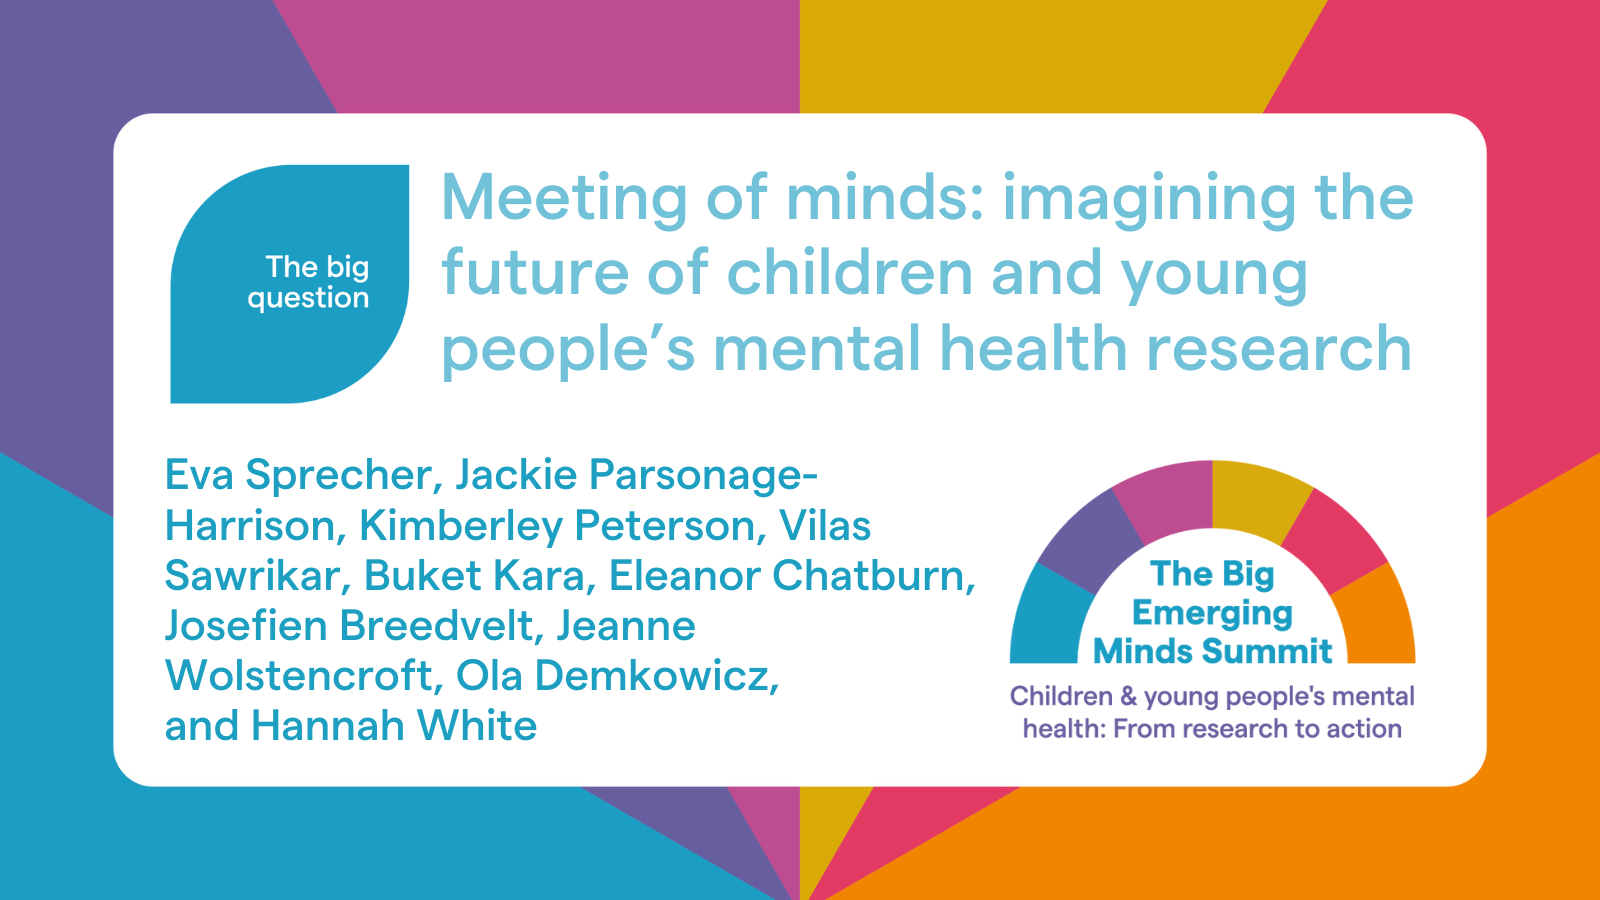 Meeting of minds: imagining the future of children and young people's mental health research